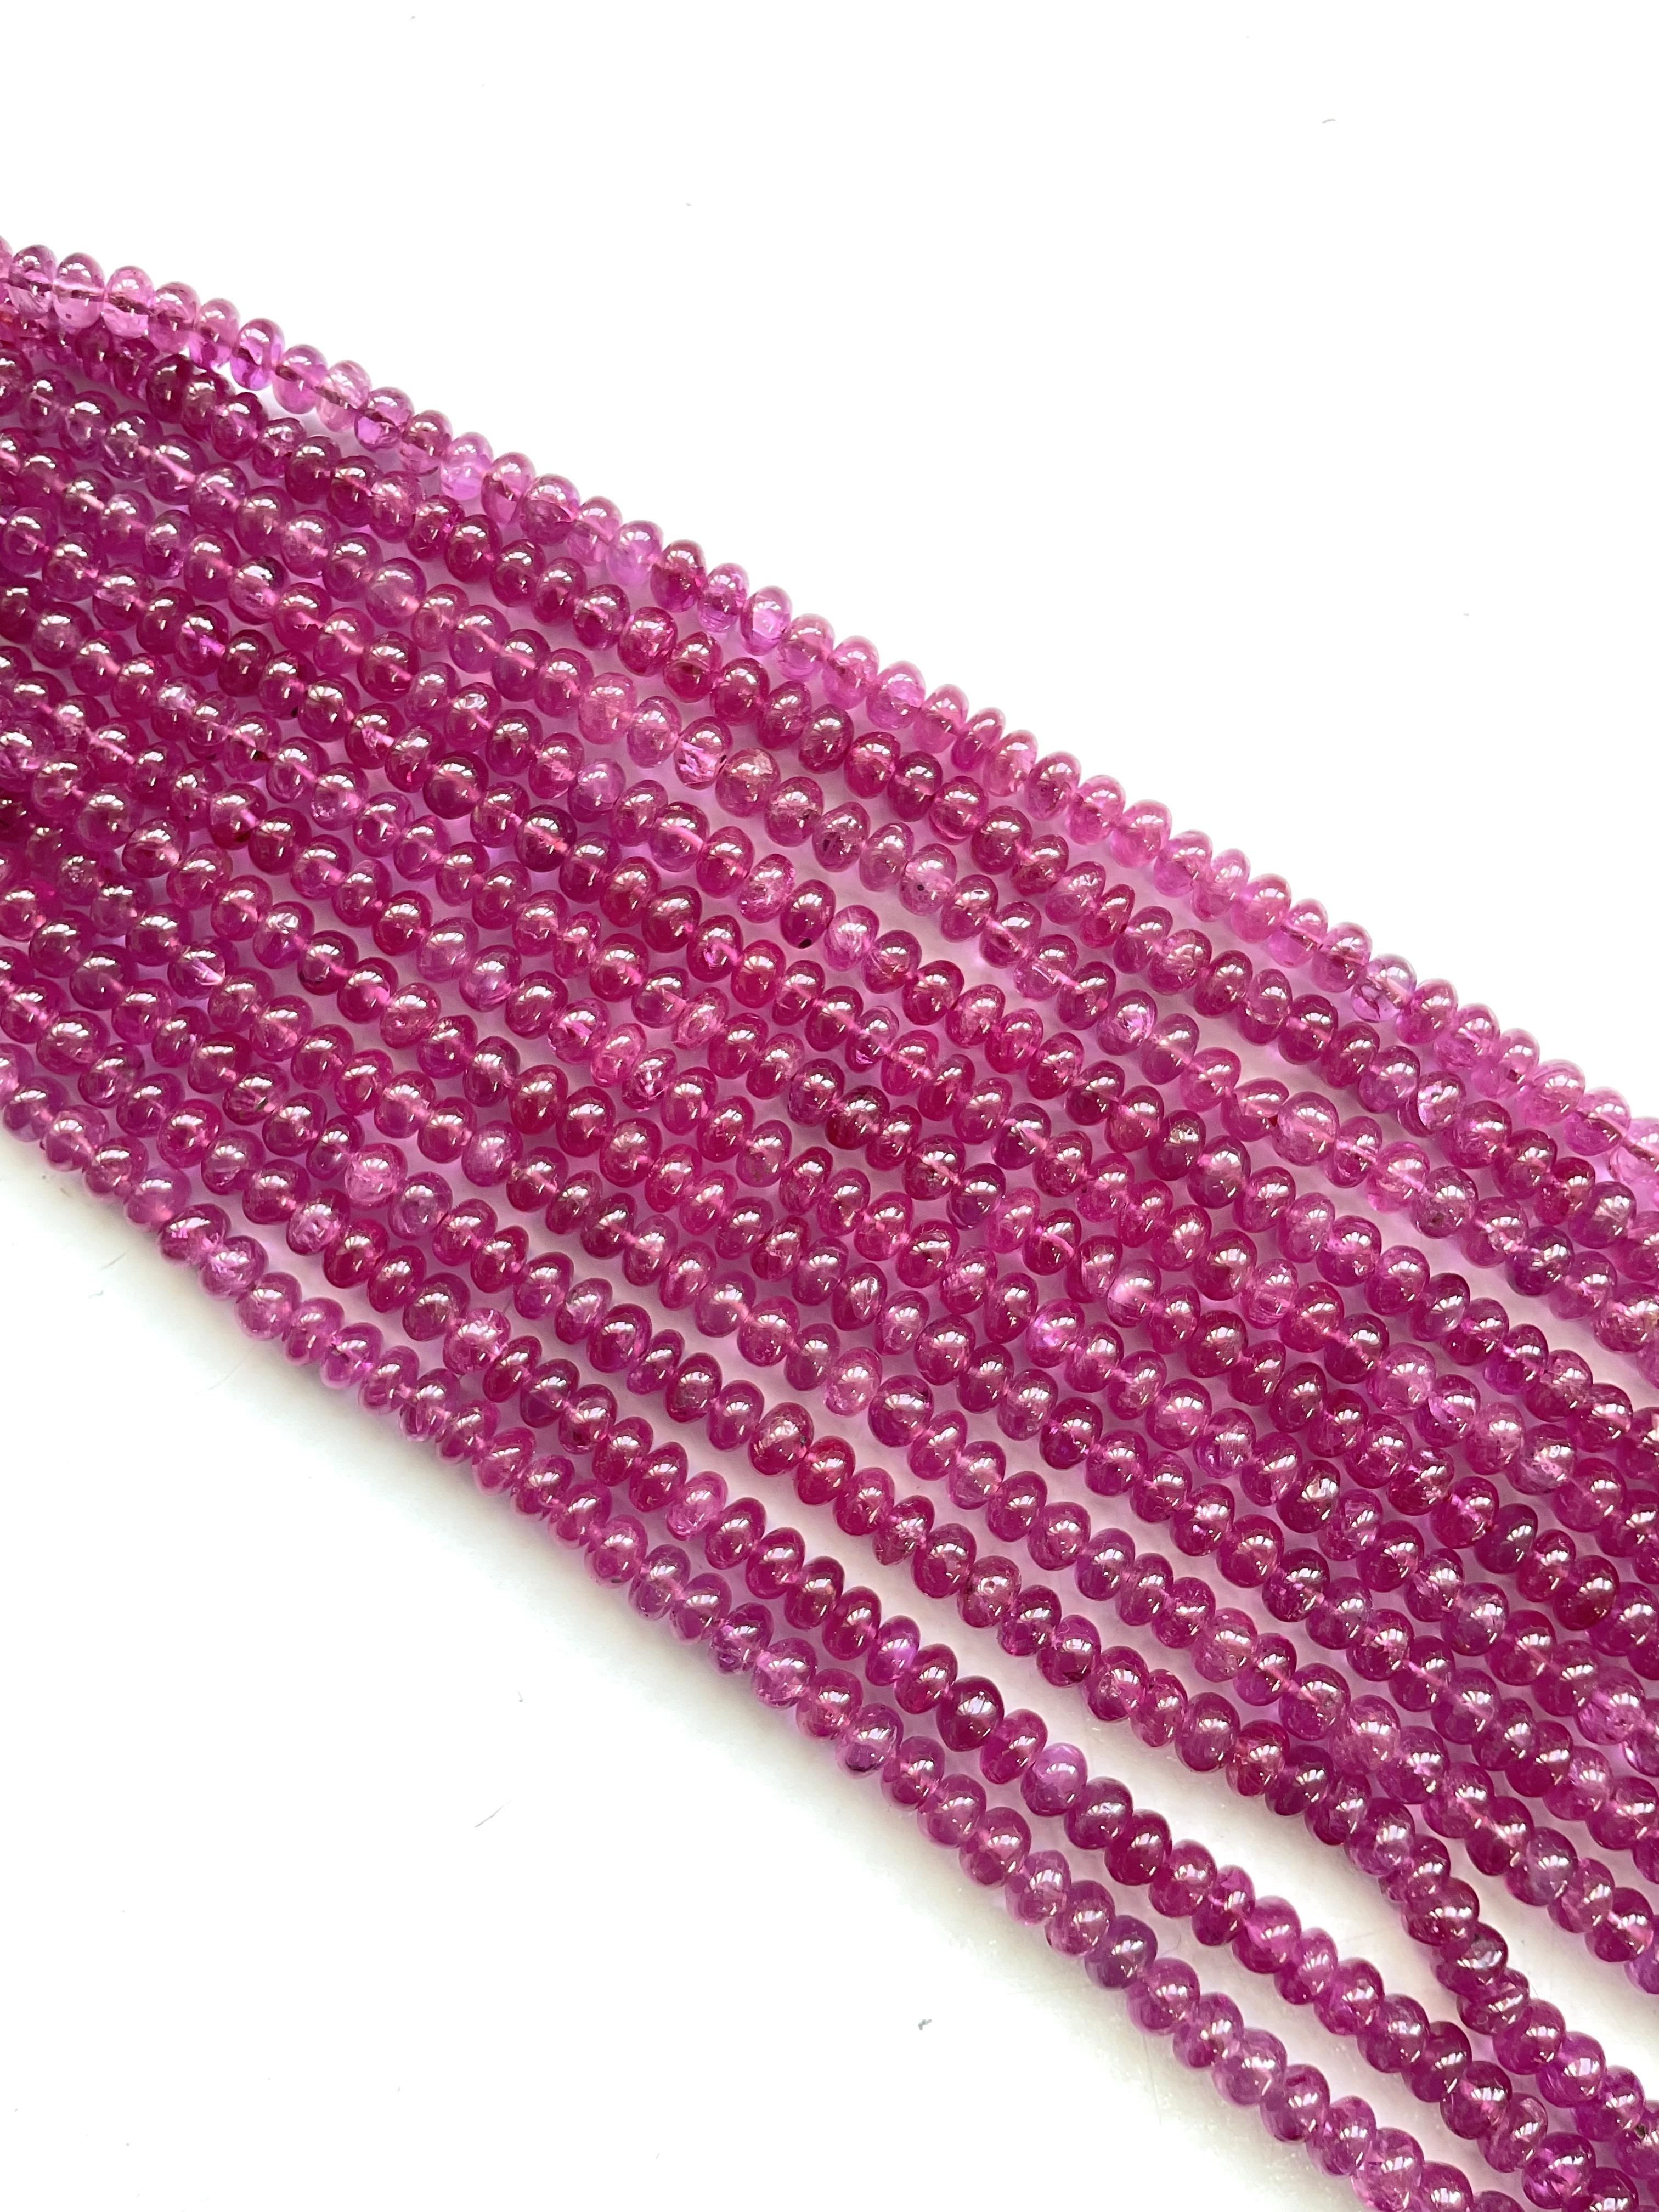 Certified 620.66 Carats Burma Ruby Top Quality Beads For Jewellery Natural Gems For Sale 2